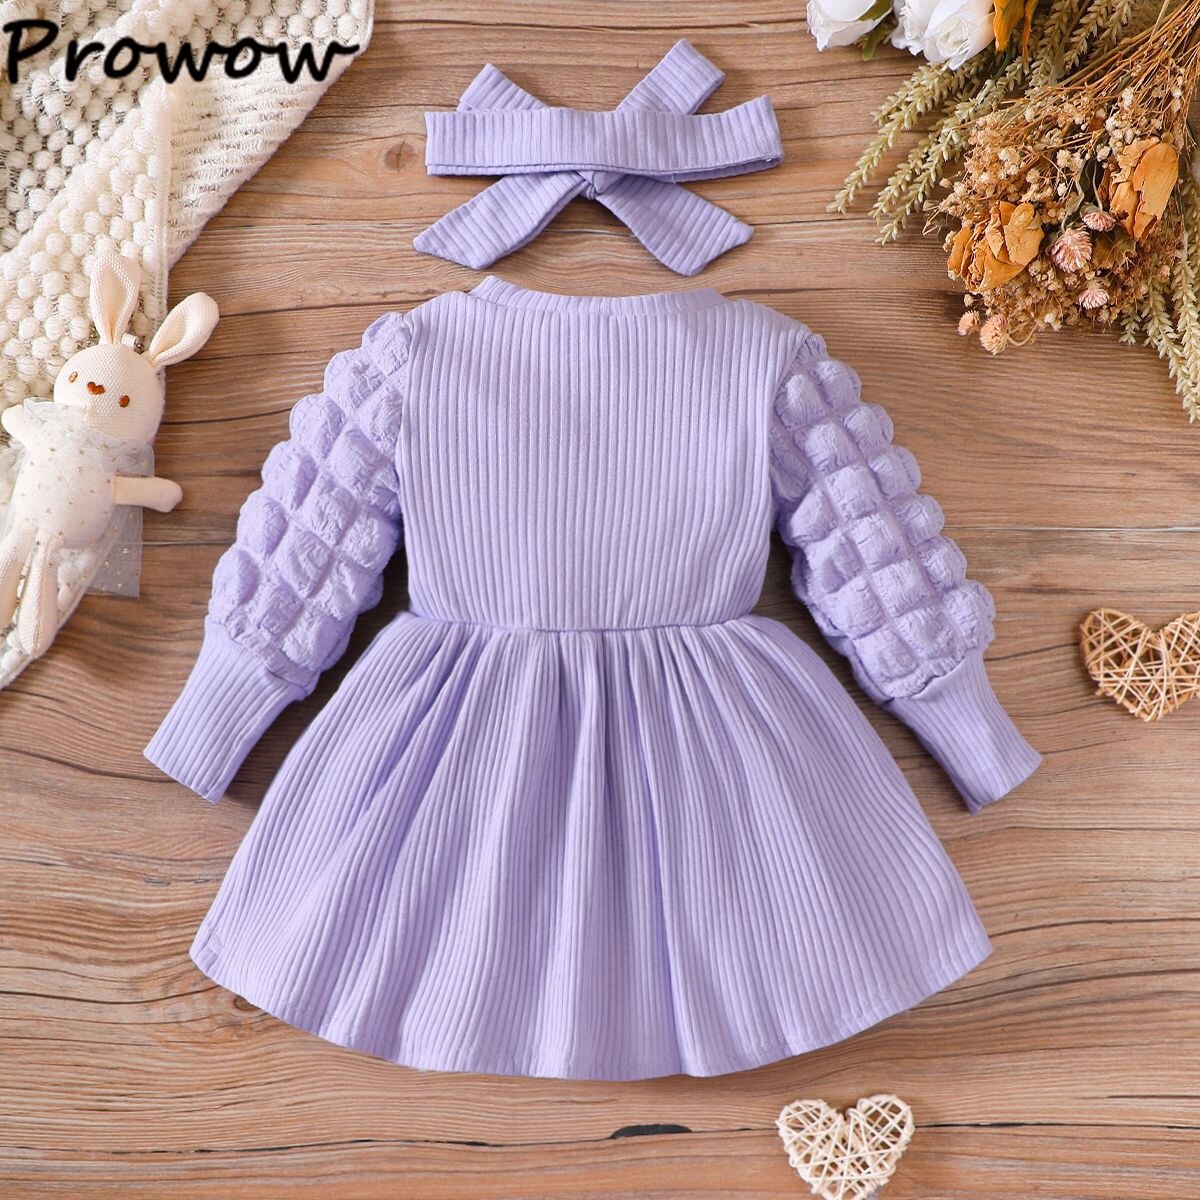 Prowow-3-24M-Baby-Dresses-Winter-Long-Puffy-Sleeve-Solid-Korean-Dress-For-Girls-With-Headband-2